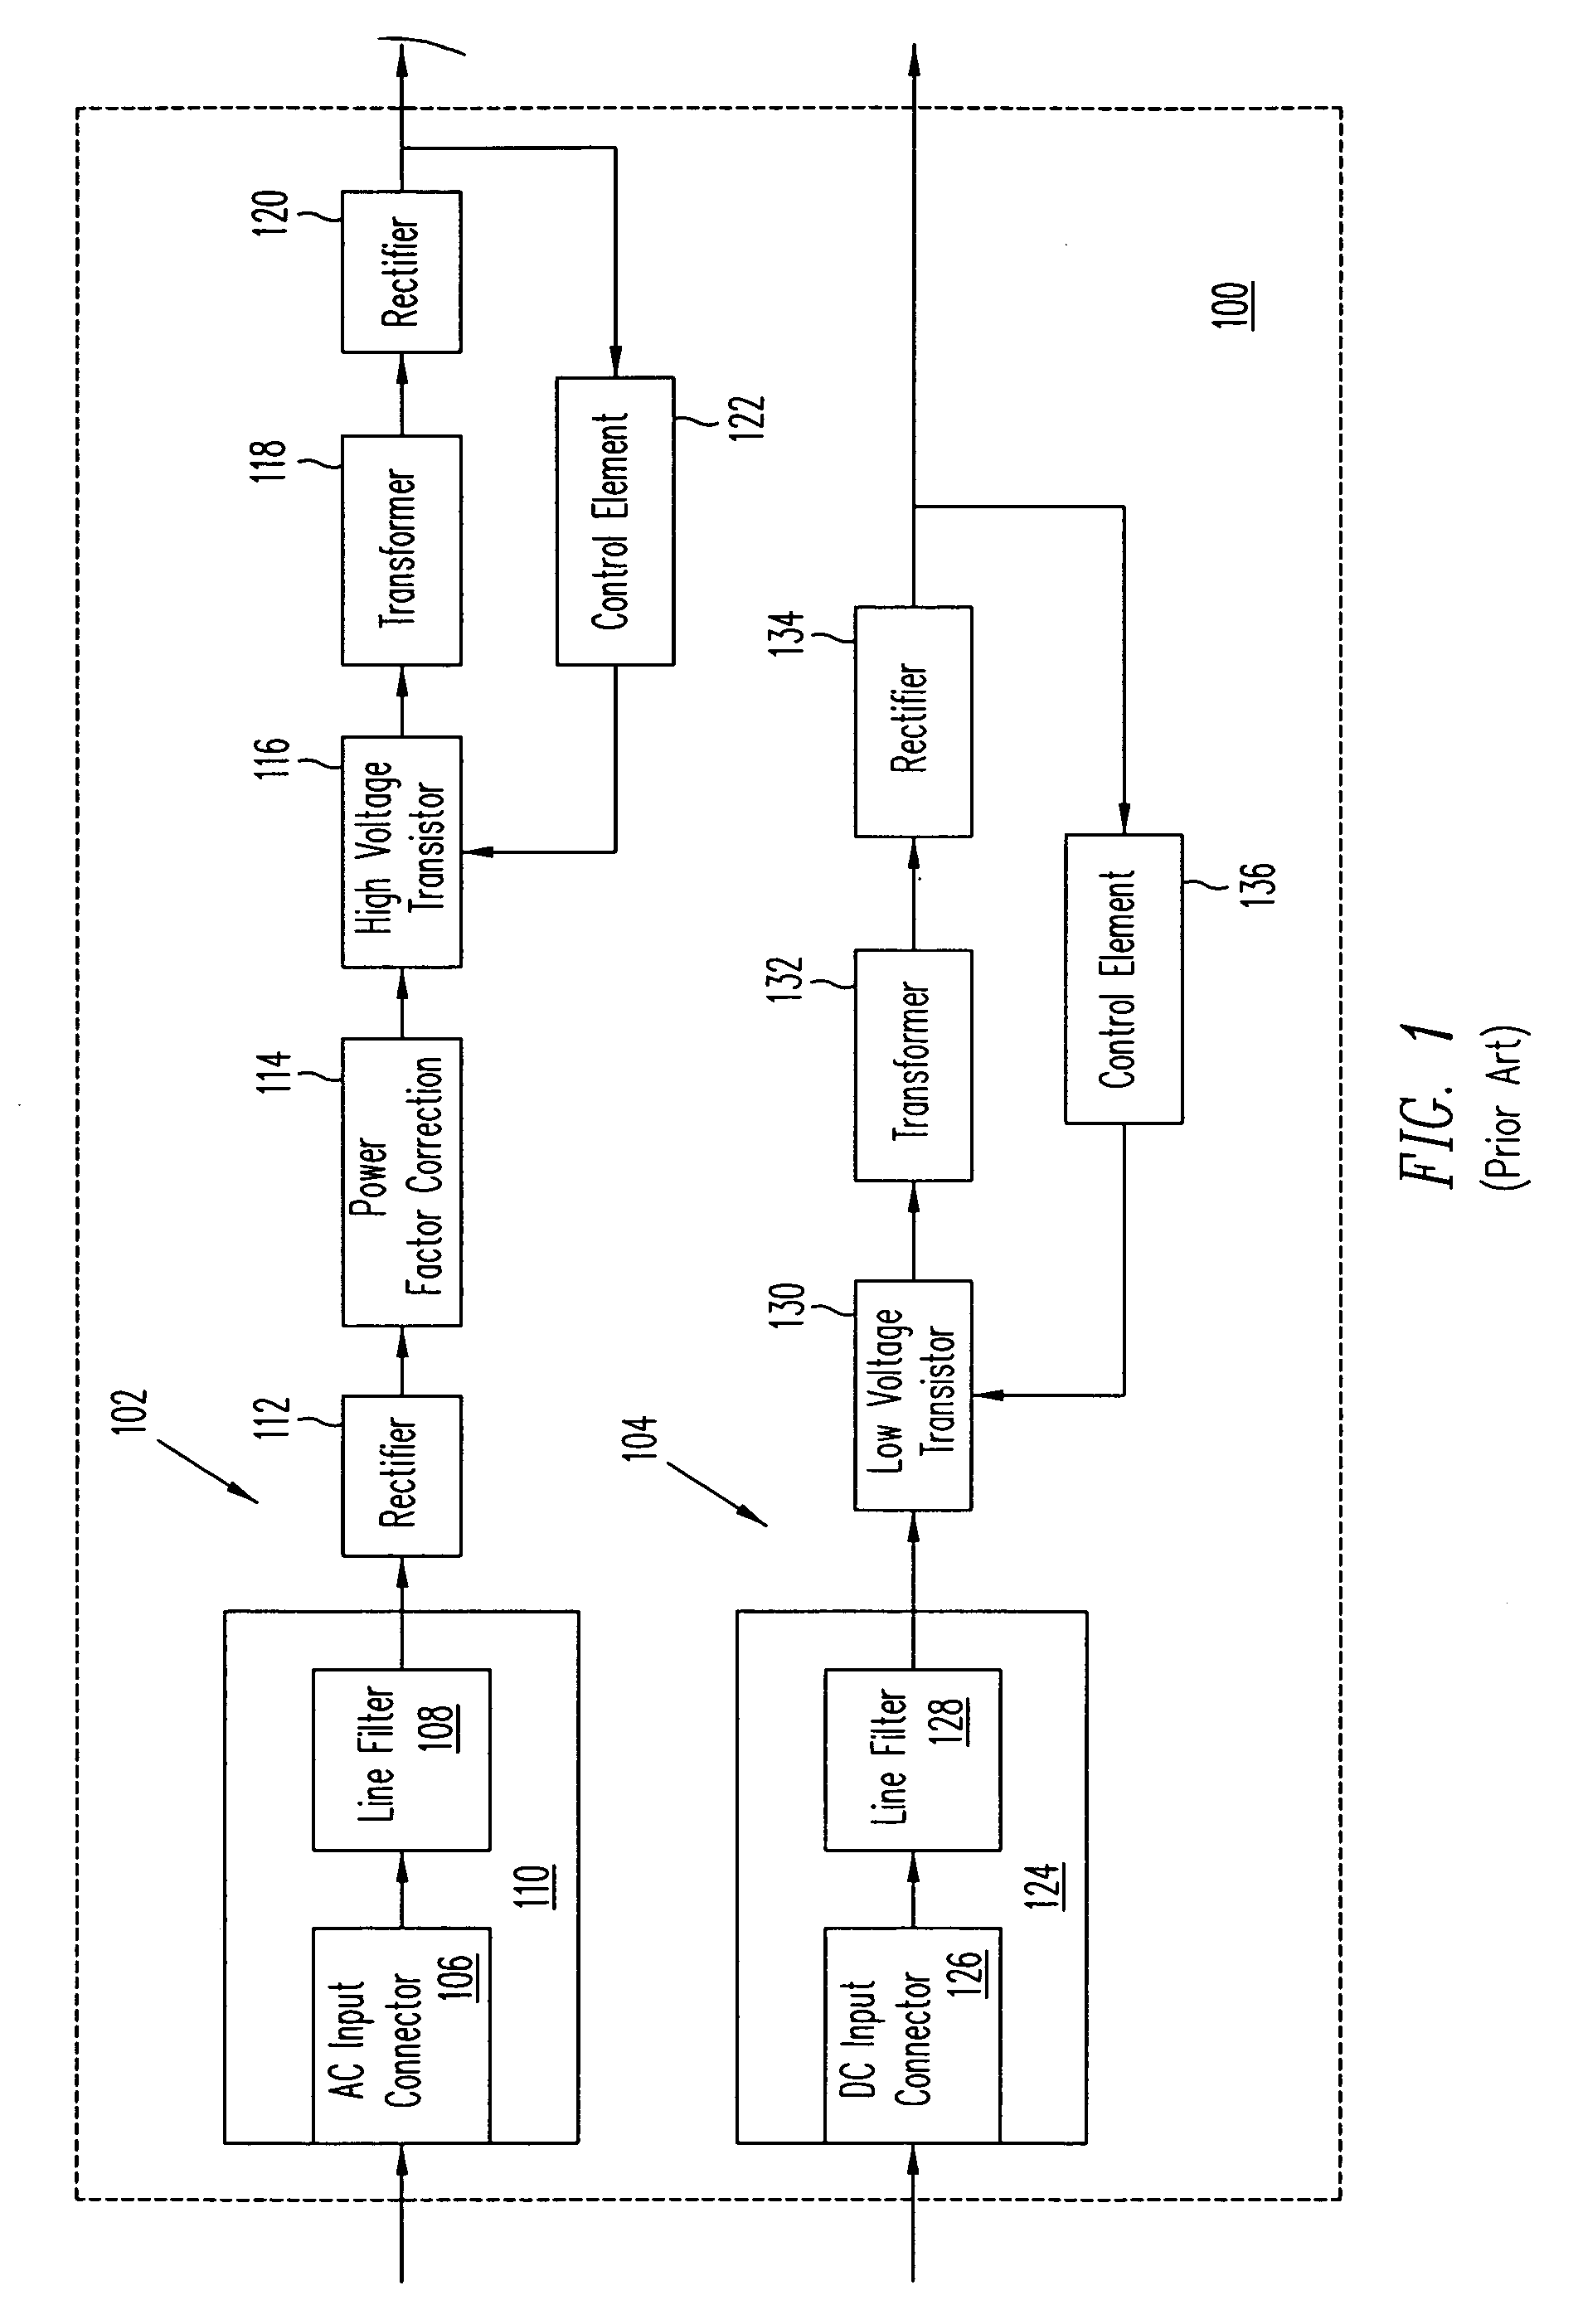 Selectable source input power supply